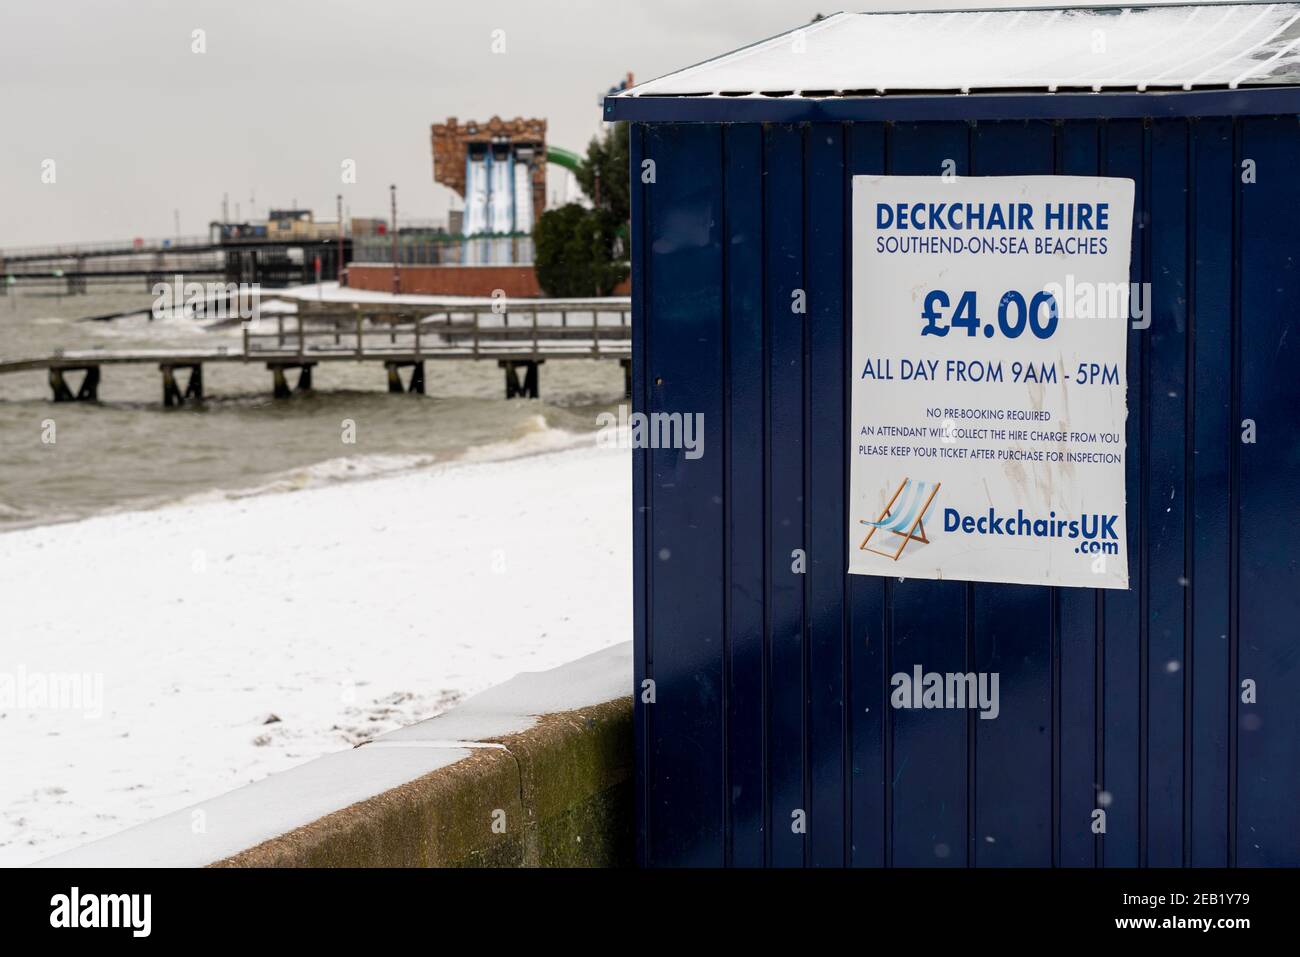 Deckchair hire storage shed, business, in Southend on Sea, Essex, UK, with snow from Storm Darcy. Out of season seaside business Stock Photo